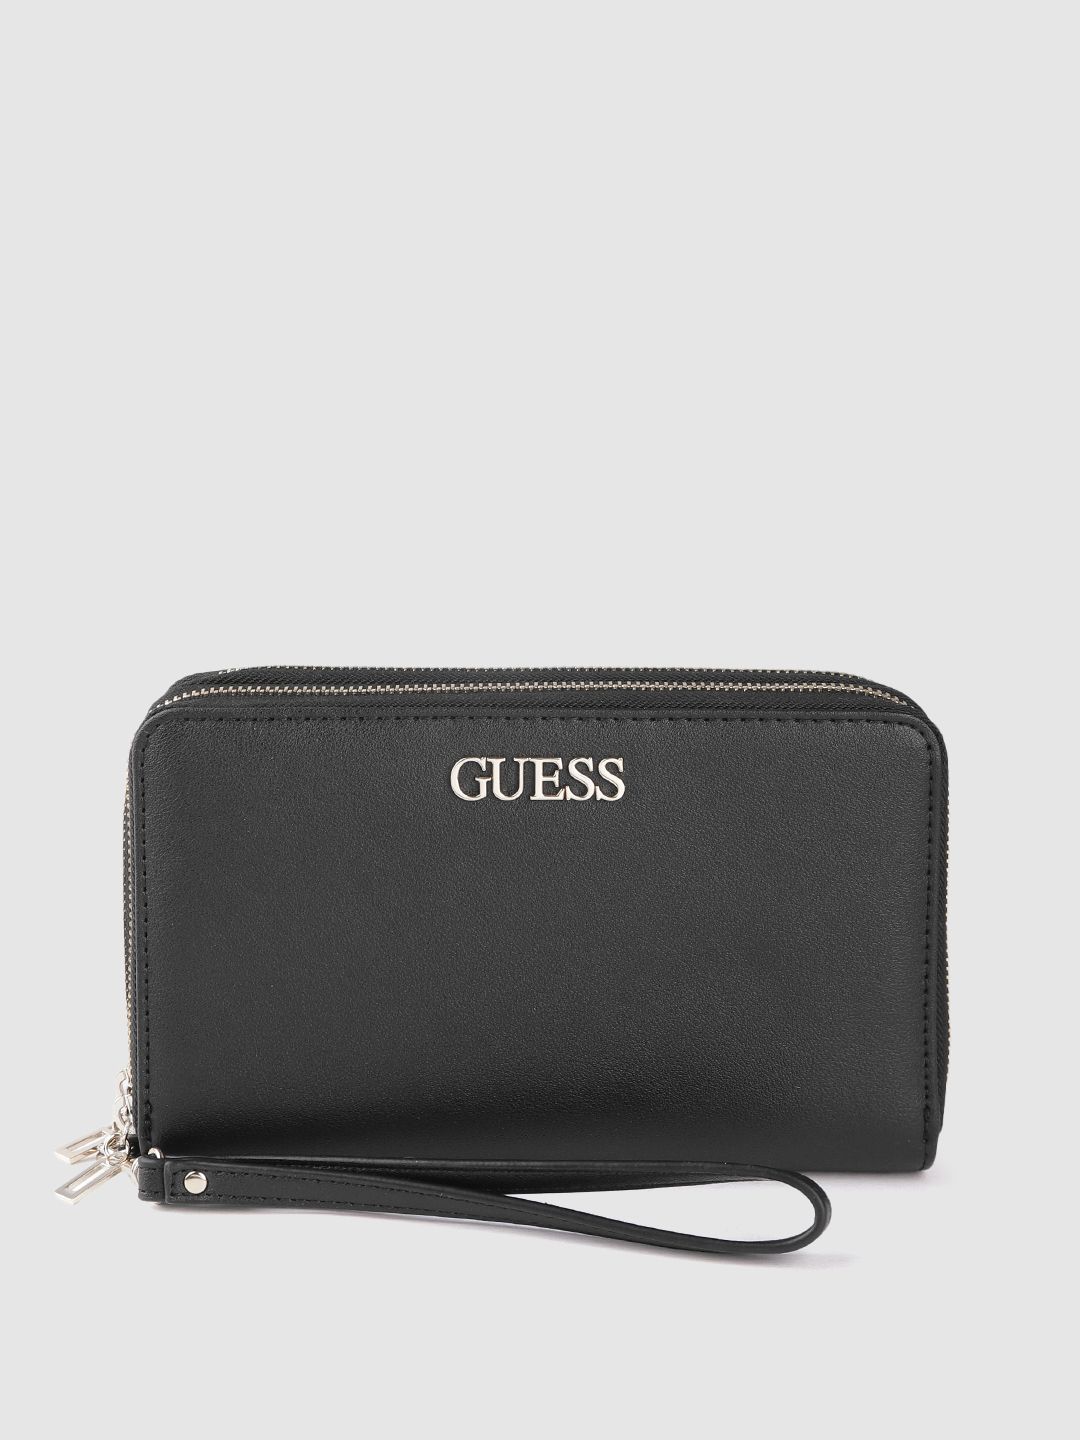 GUESS Women Black & Gold-Toned PU Zip Around Wallet Price in India